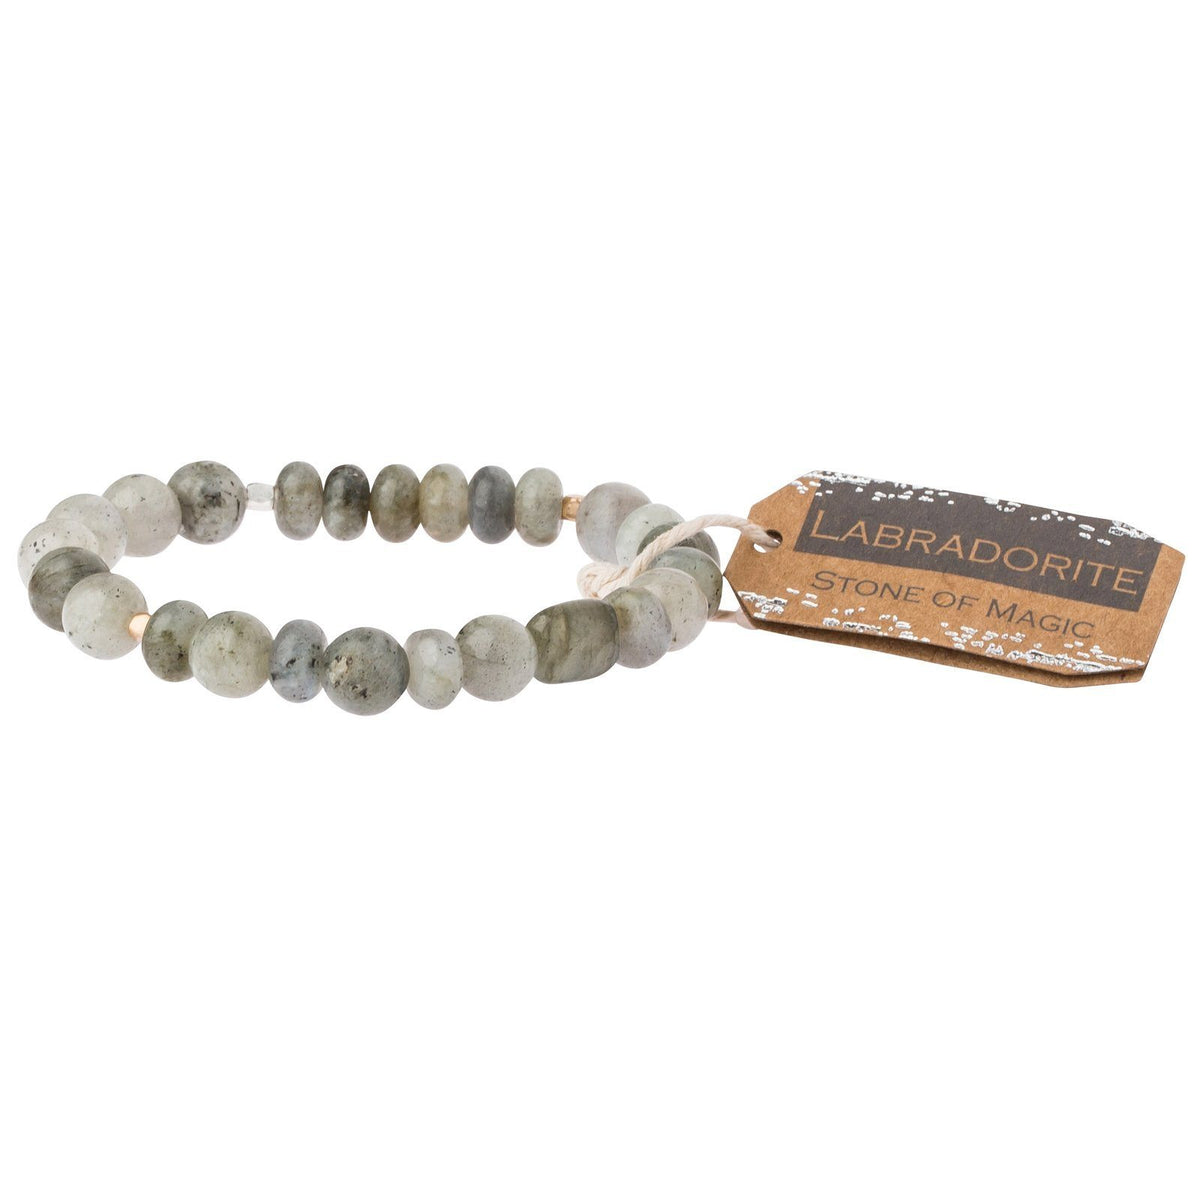 Scout Curated Wears Labradorite Stone Bracelet - Stone of Magic (1733256085547)